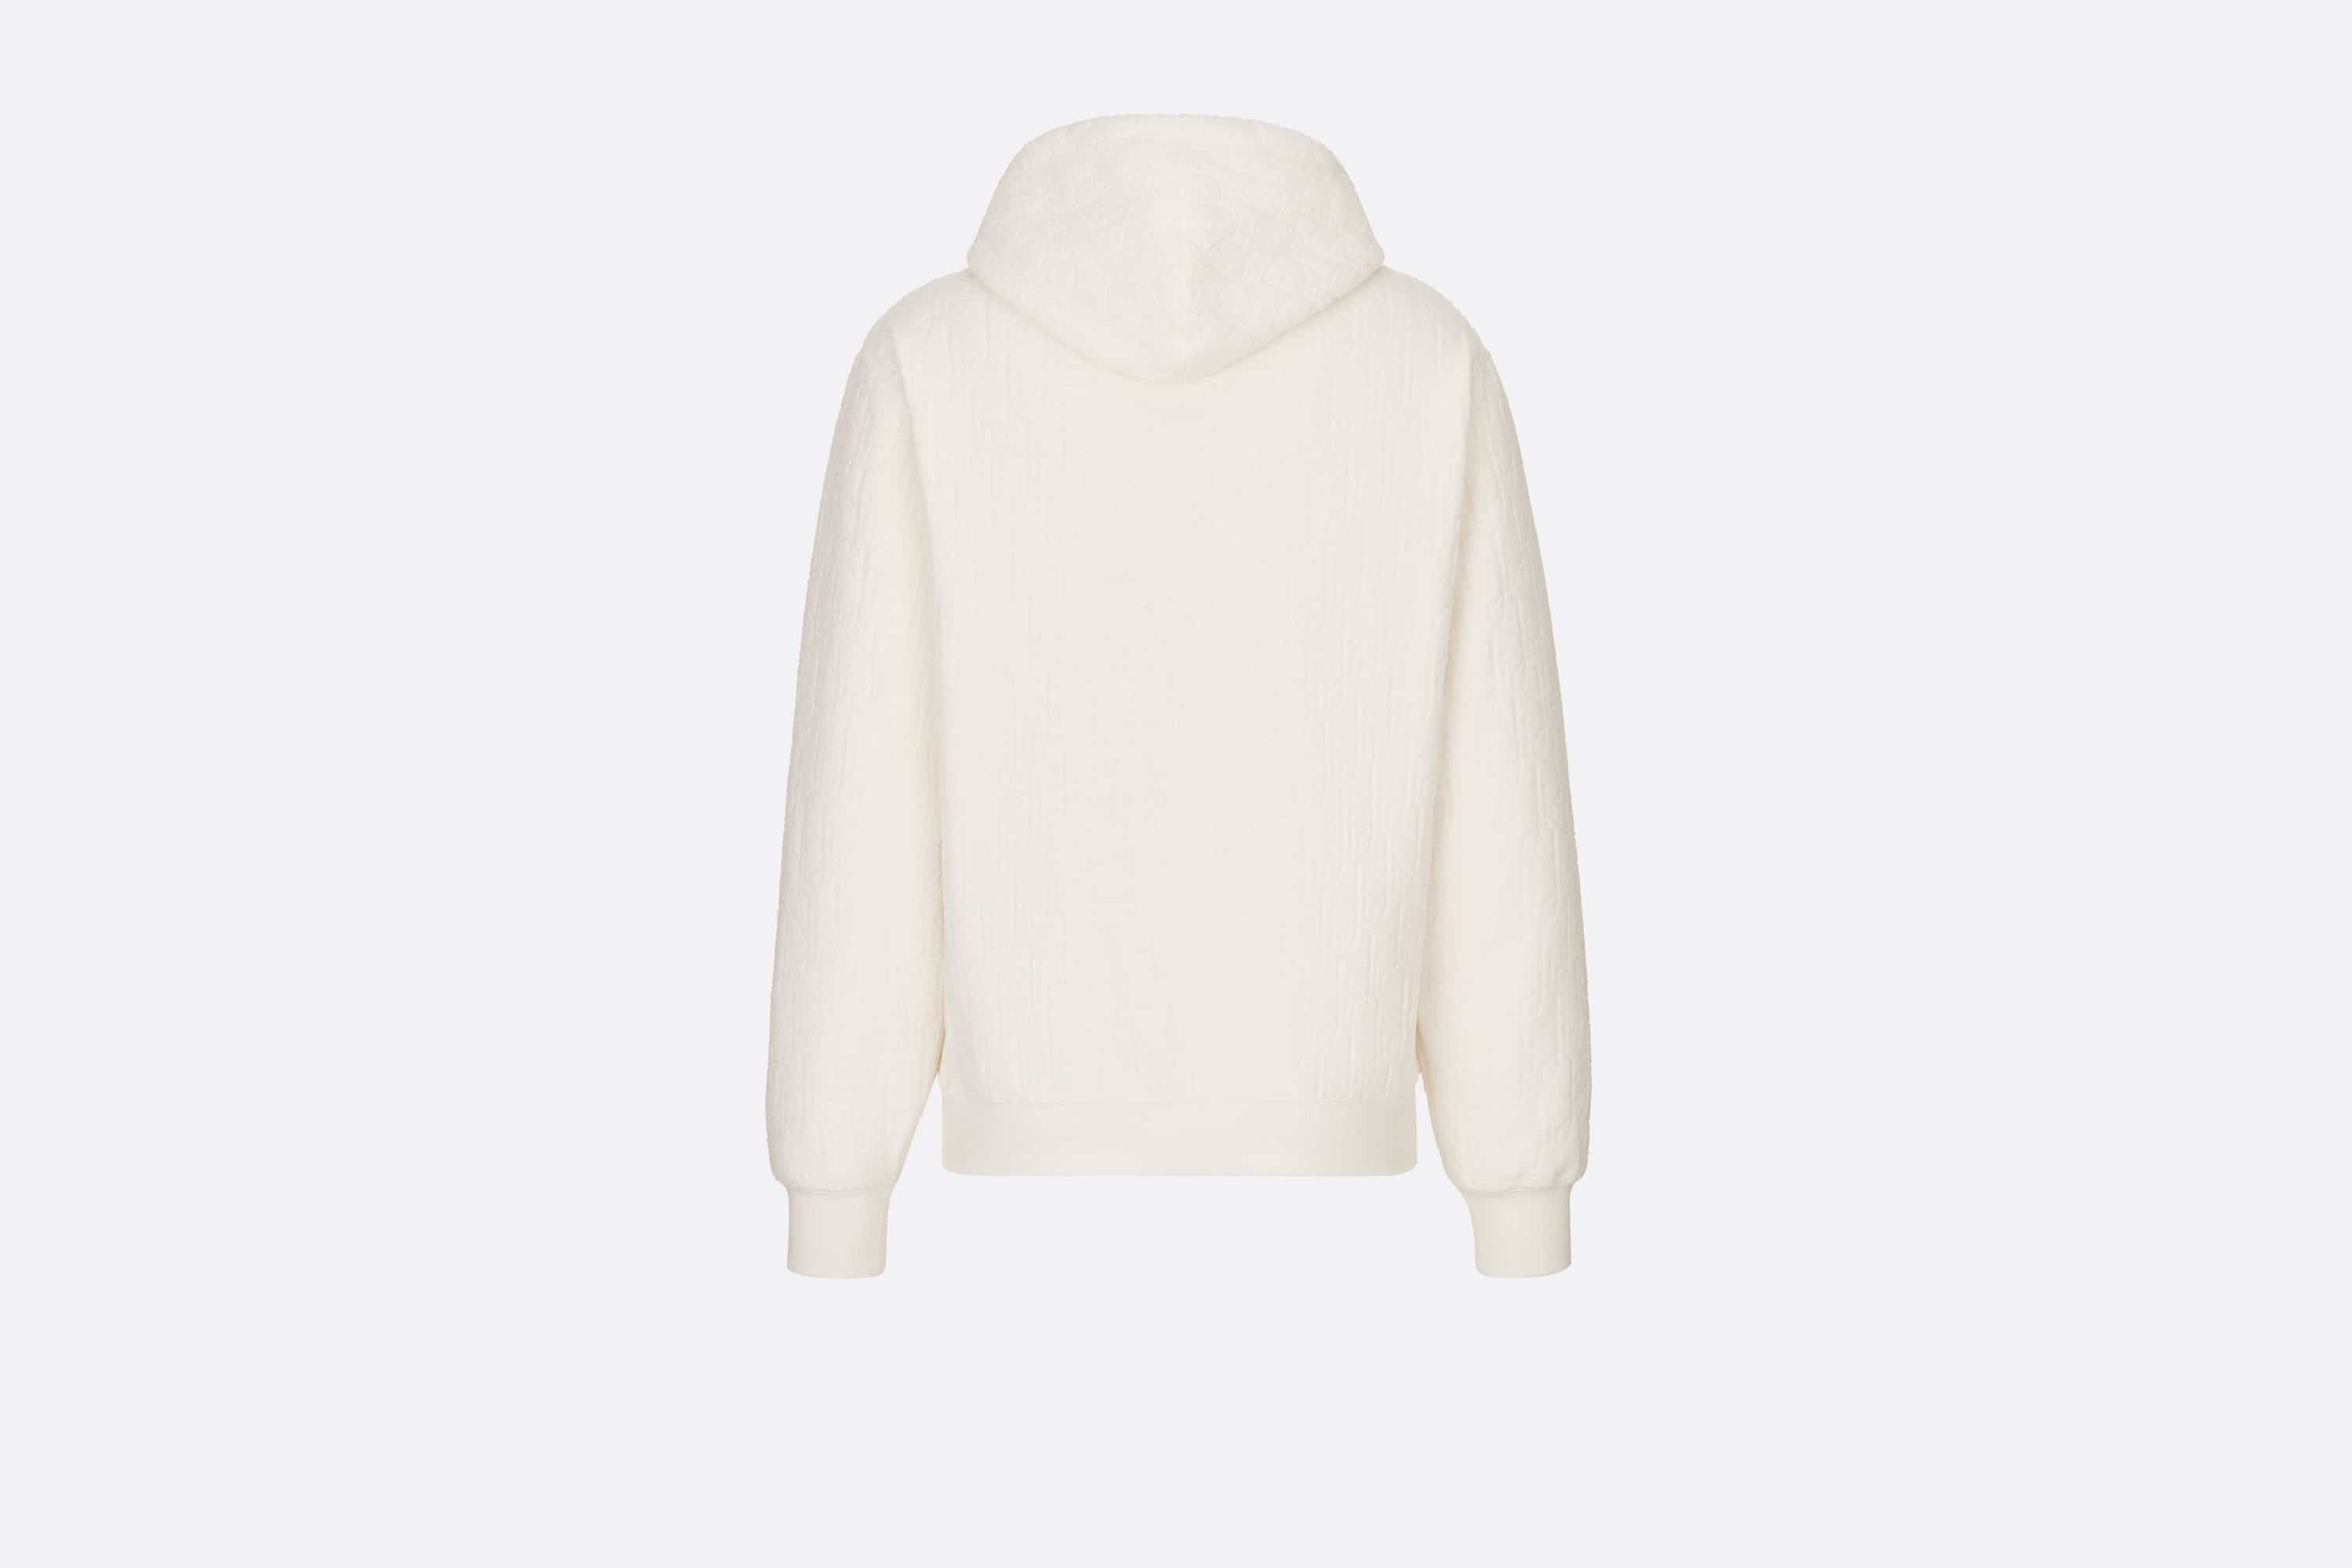 Dior Oblique Relaxed-Fit Hooded Sweatshirt Blue Terry Cotton Jacquard